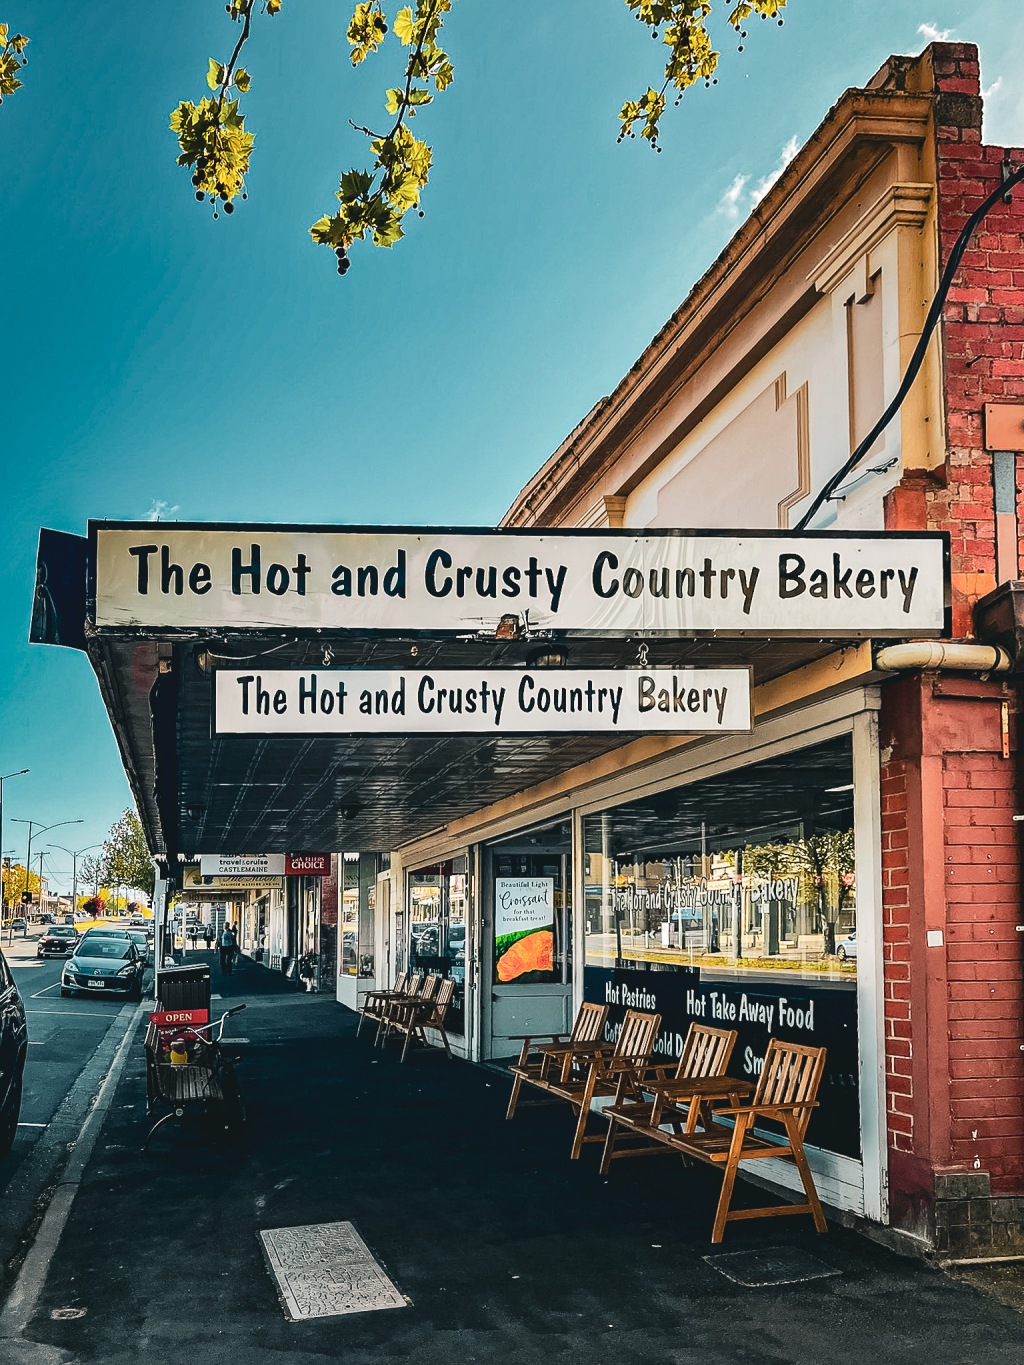 Hot and Crusty Country Bakery, Castlemaine